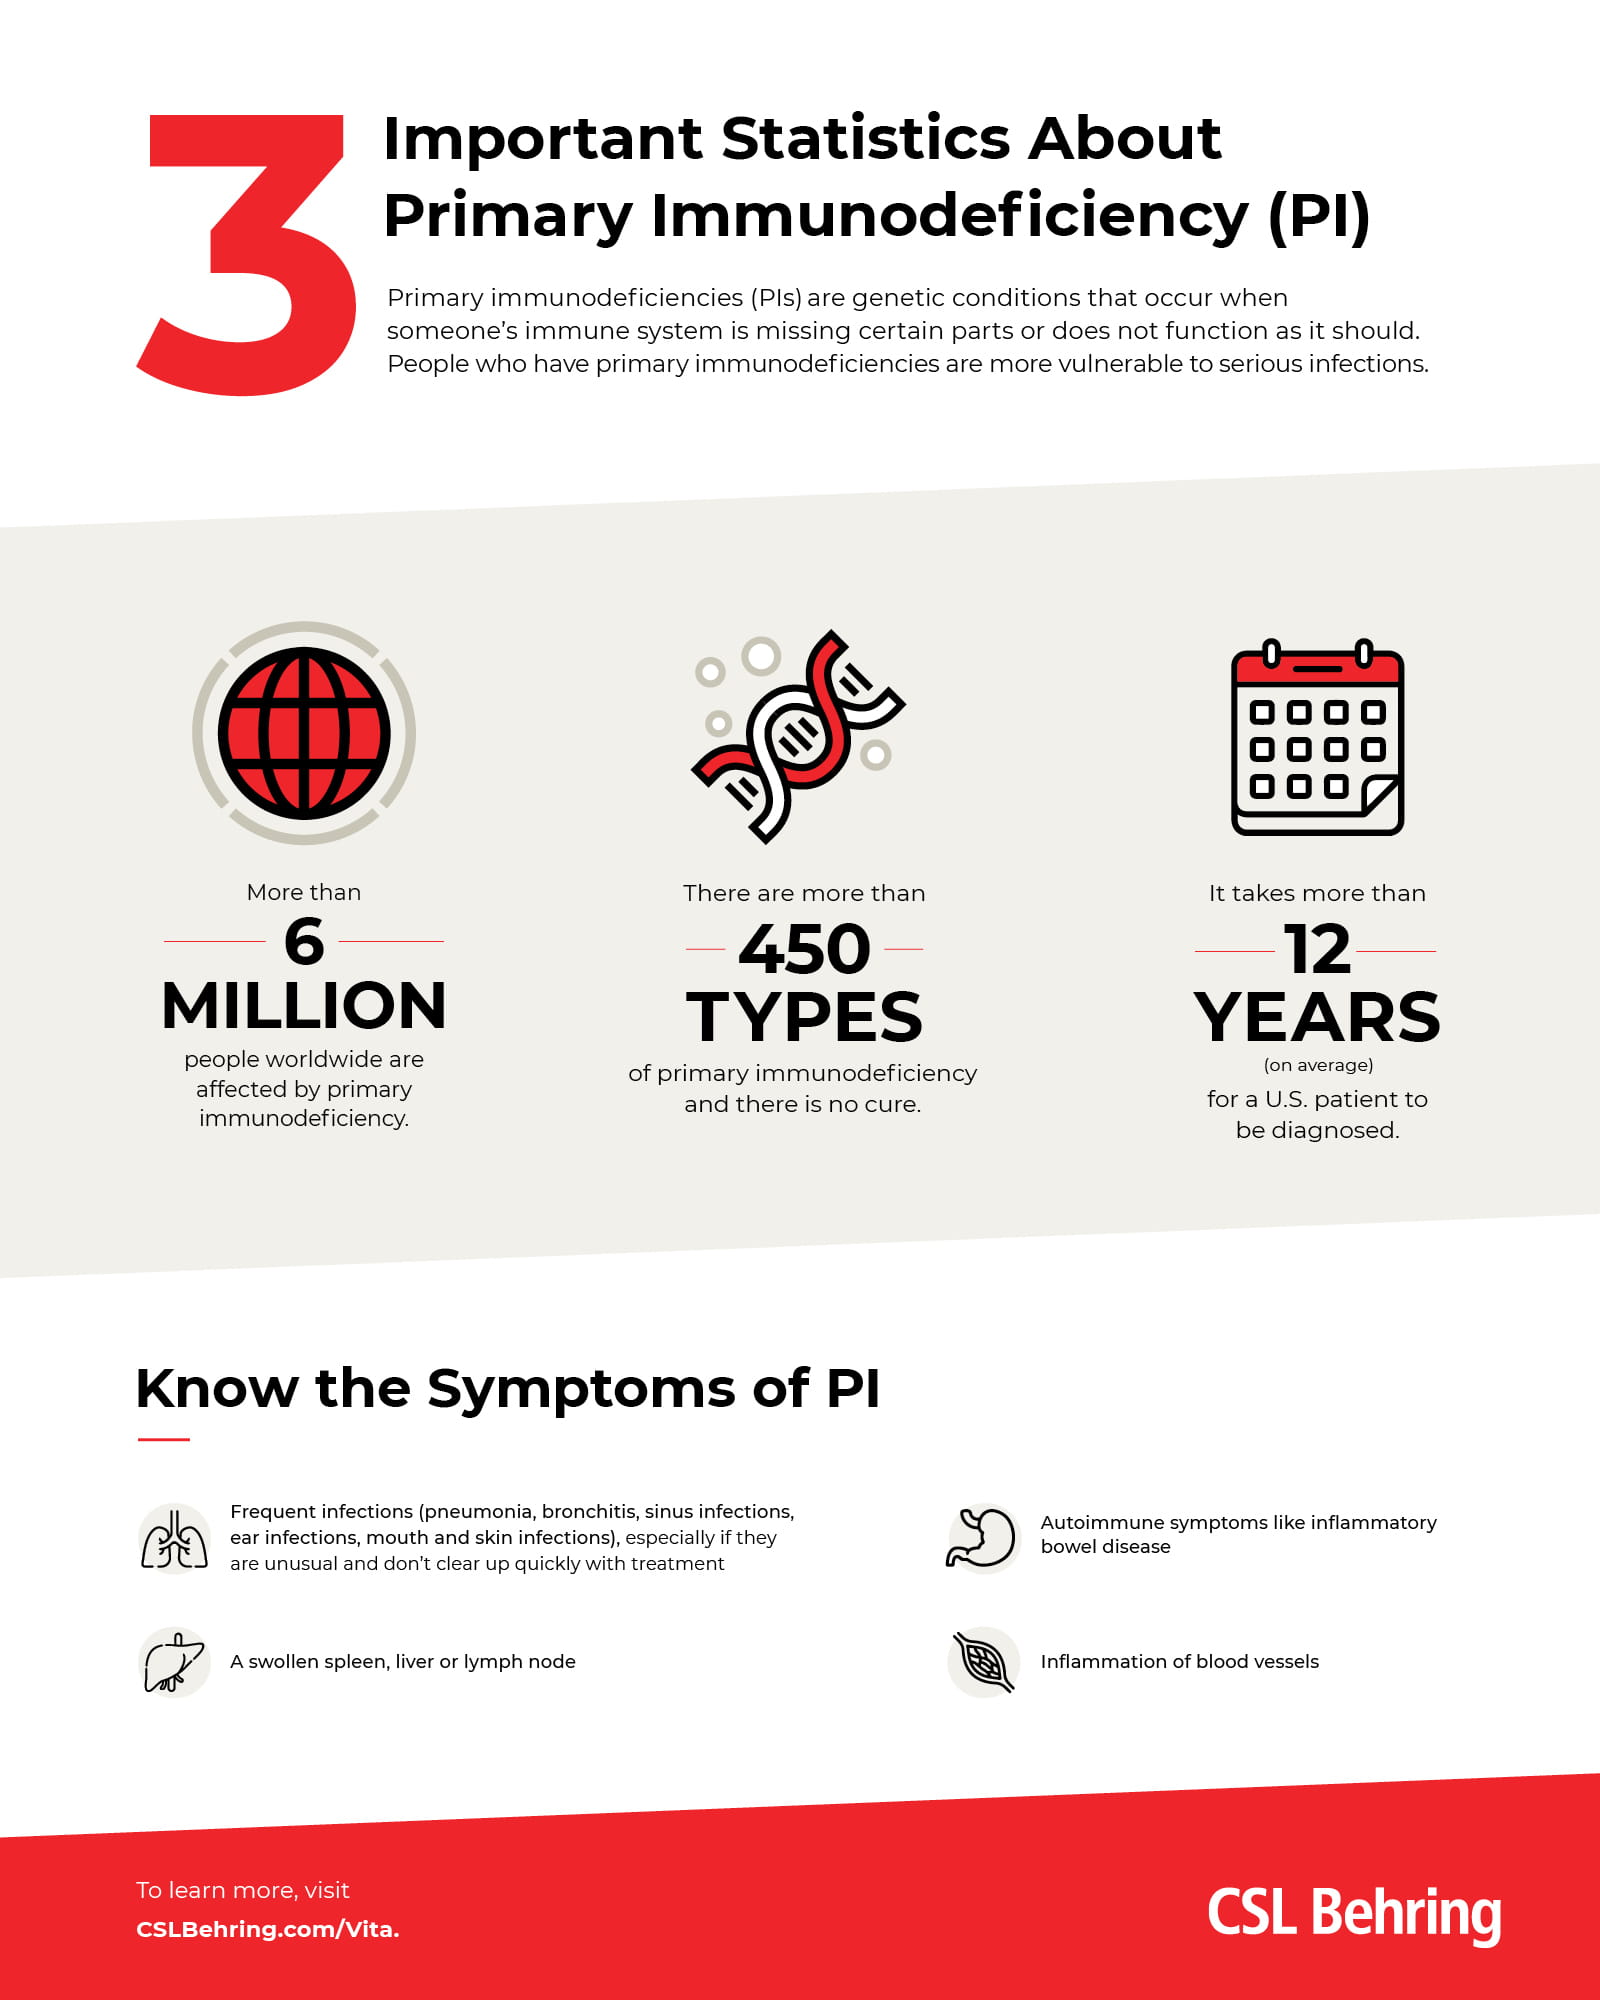 3 important stats about primary immunodeficiency, including that it affects 6 million people, there are an estimated 450 types and it takes 12 years, on average, for patient to get diagnosed.